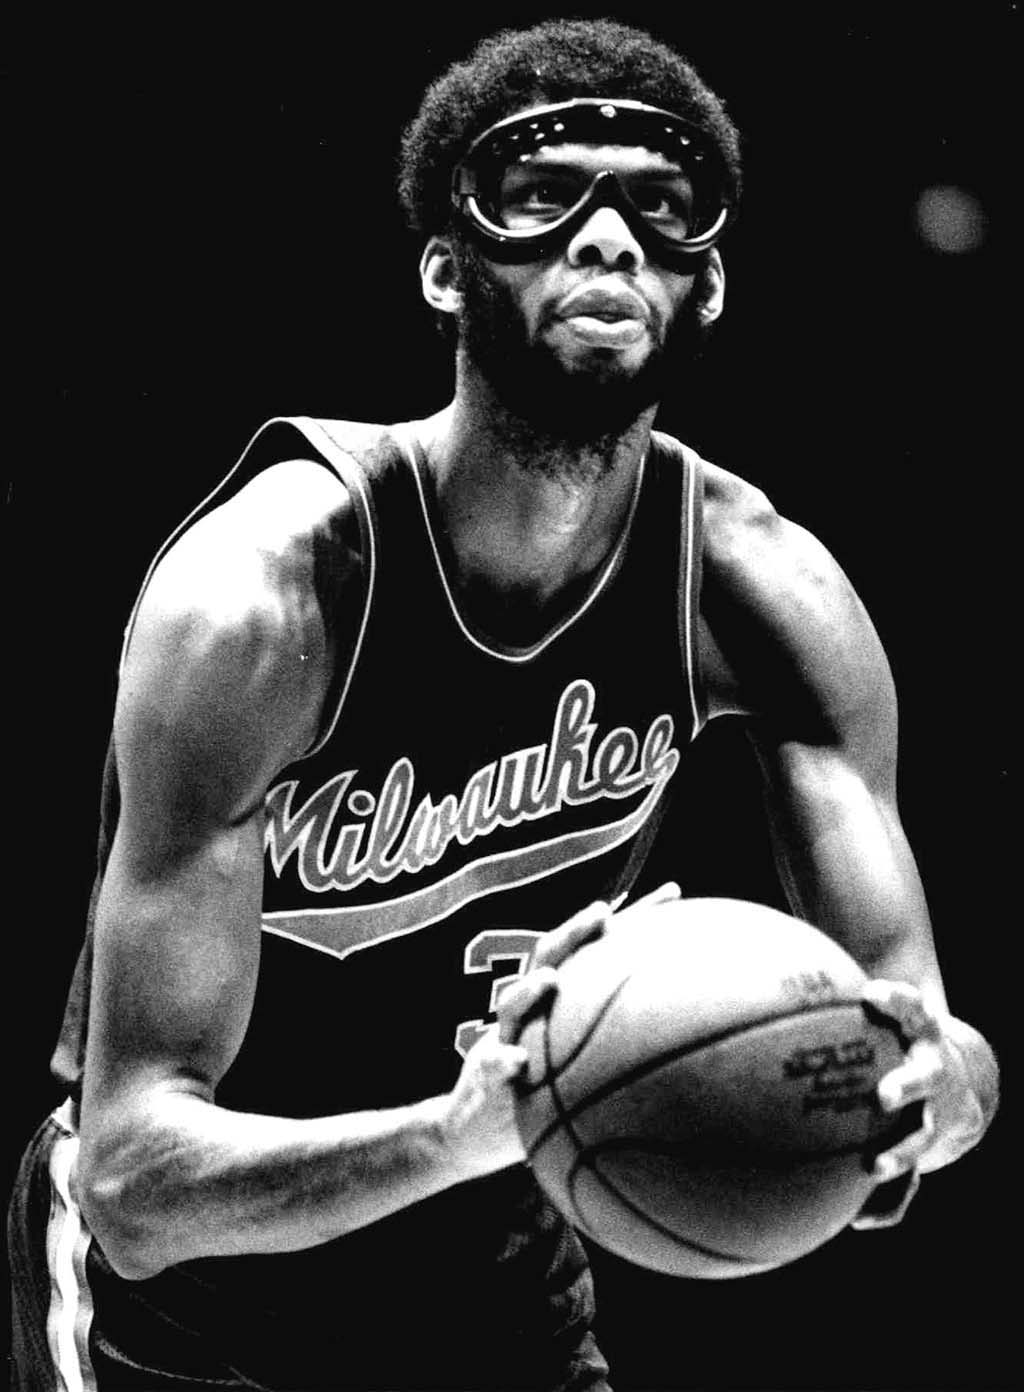 Kareem Abdul-Jabbar: the man who dominated college hoops and got